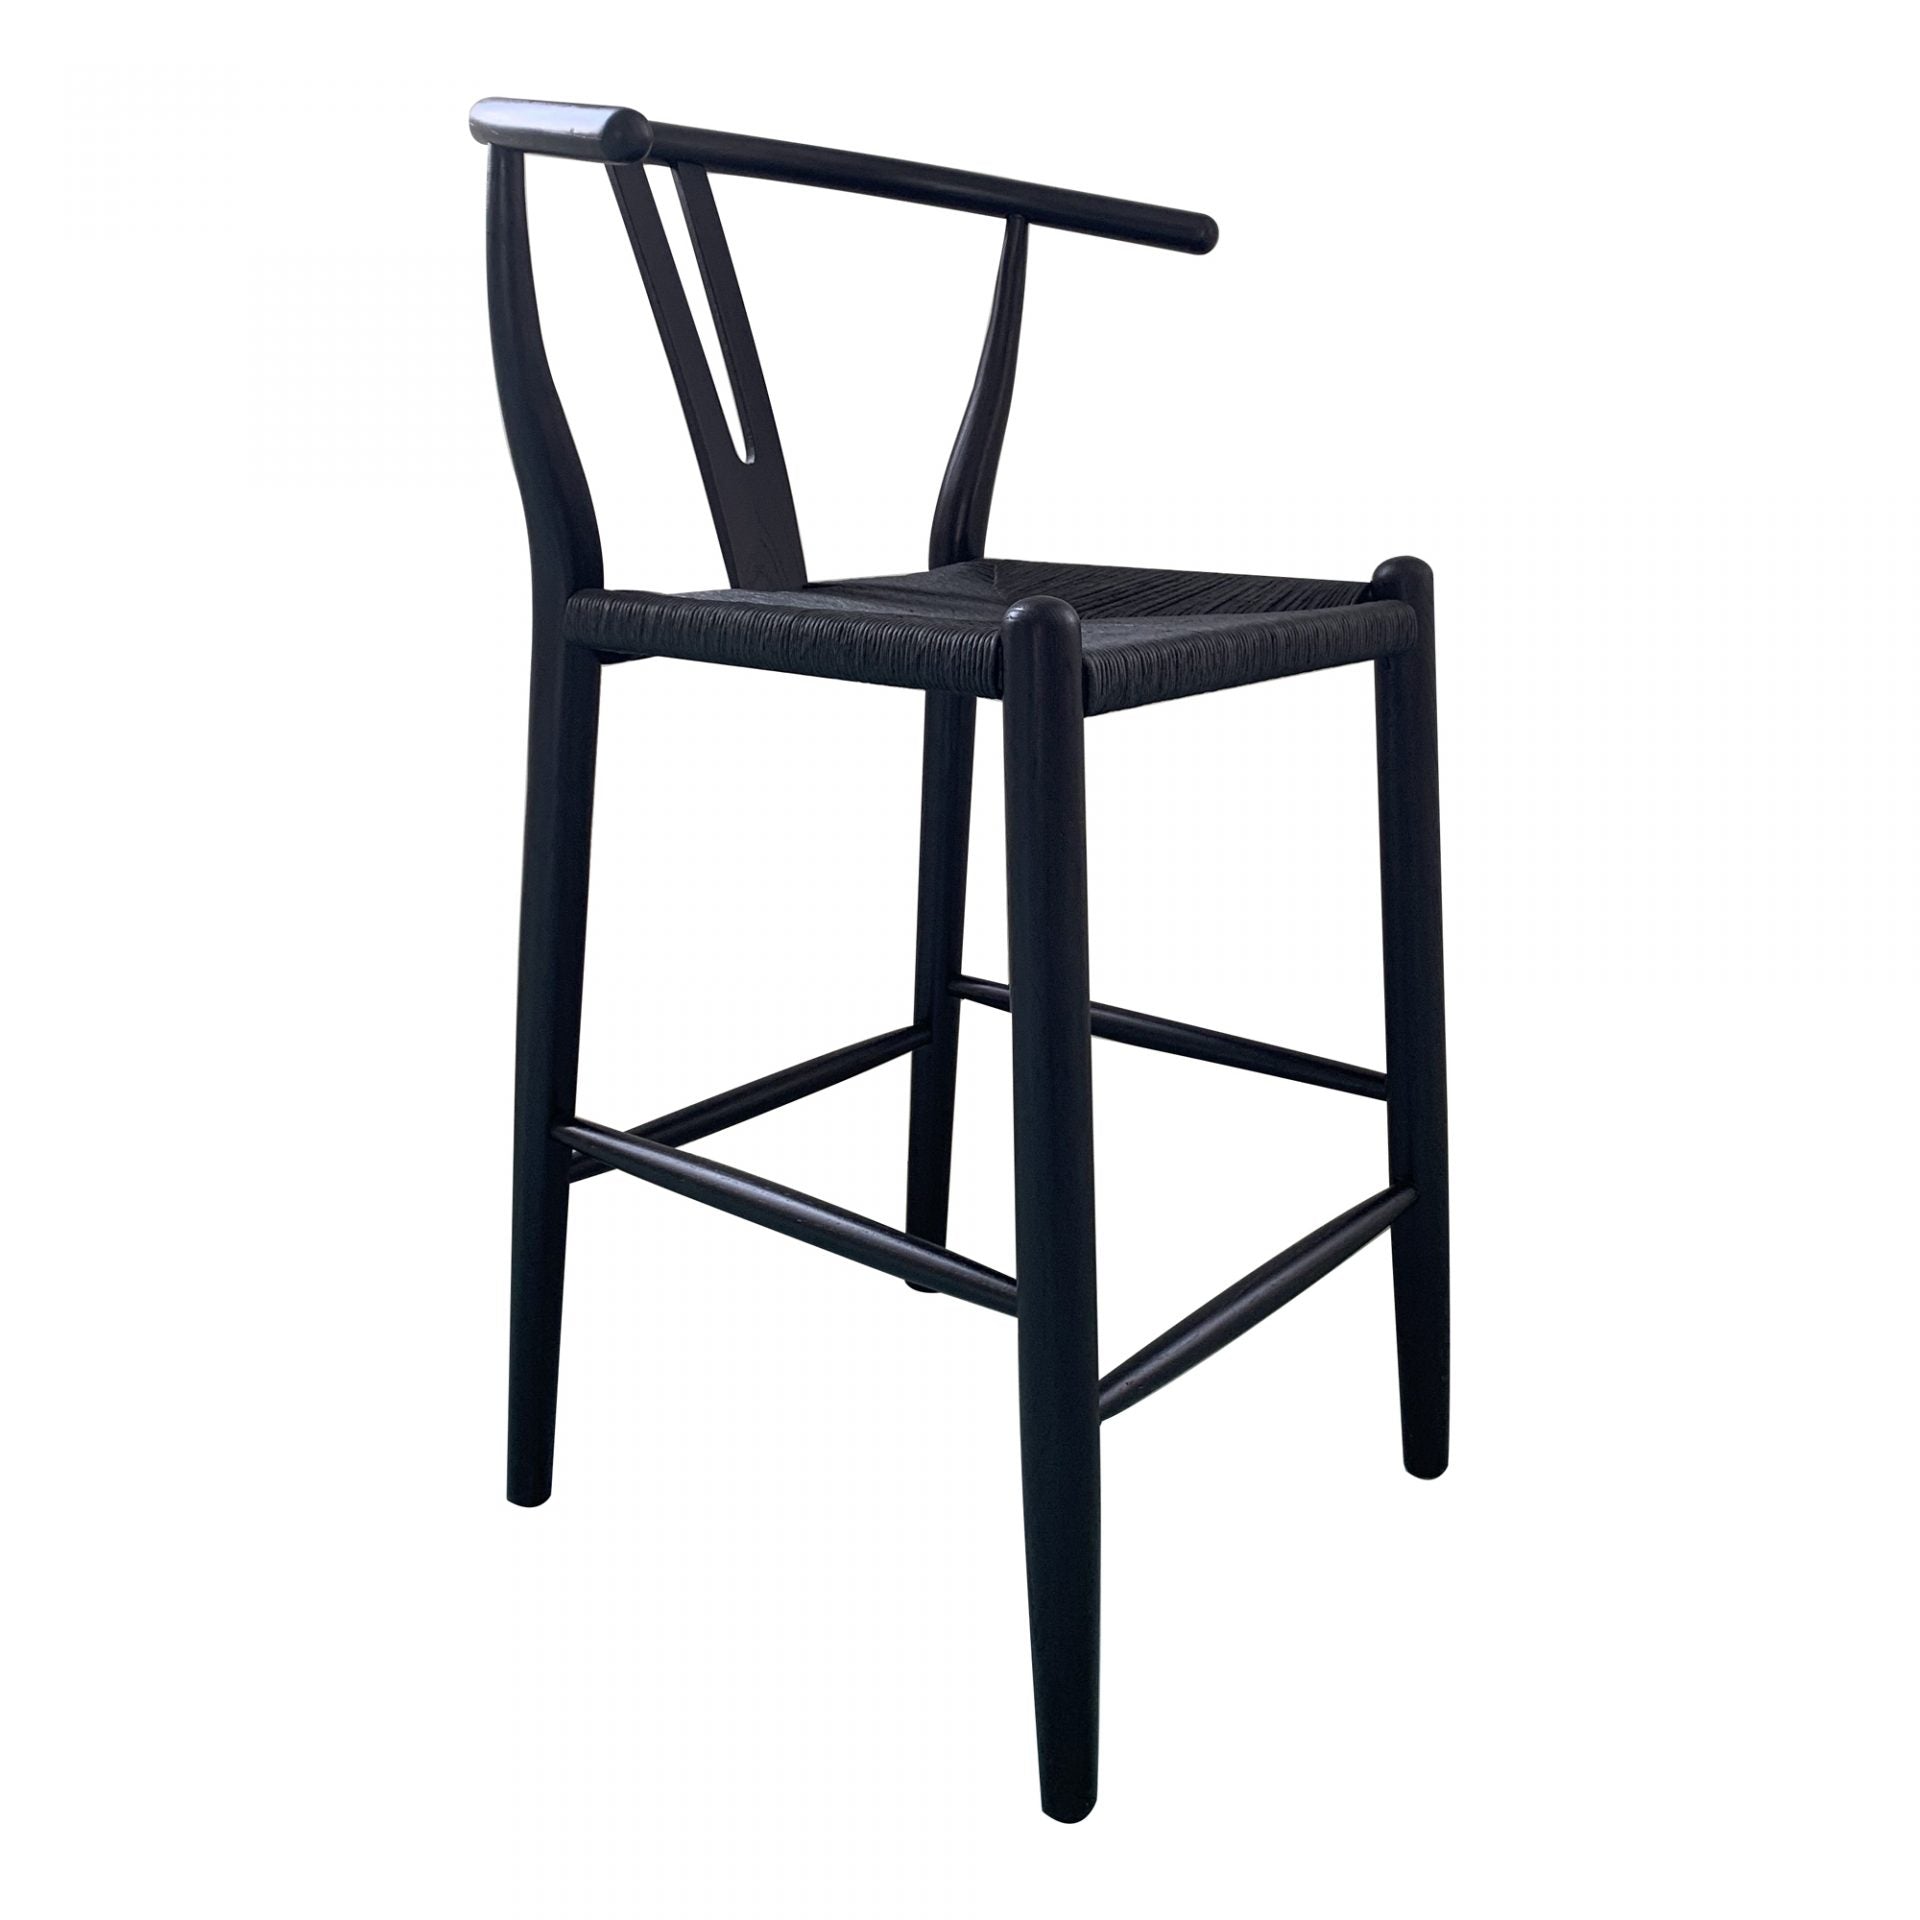 The Ventana Counter + Bar Stool - Black is a simple, sturdy construction with a  contemporary woven paper fiber seat, and convenient wrap around footrest. The stylish seat comprises solid elm wood with a black, semi-gloss finish for a lifelong stool for any kitchen, island, or bar area! 